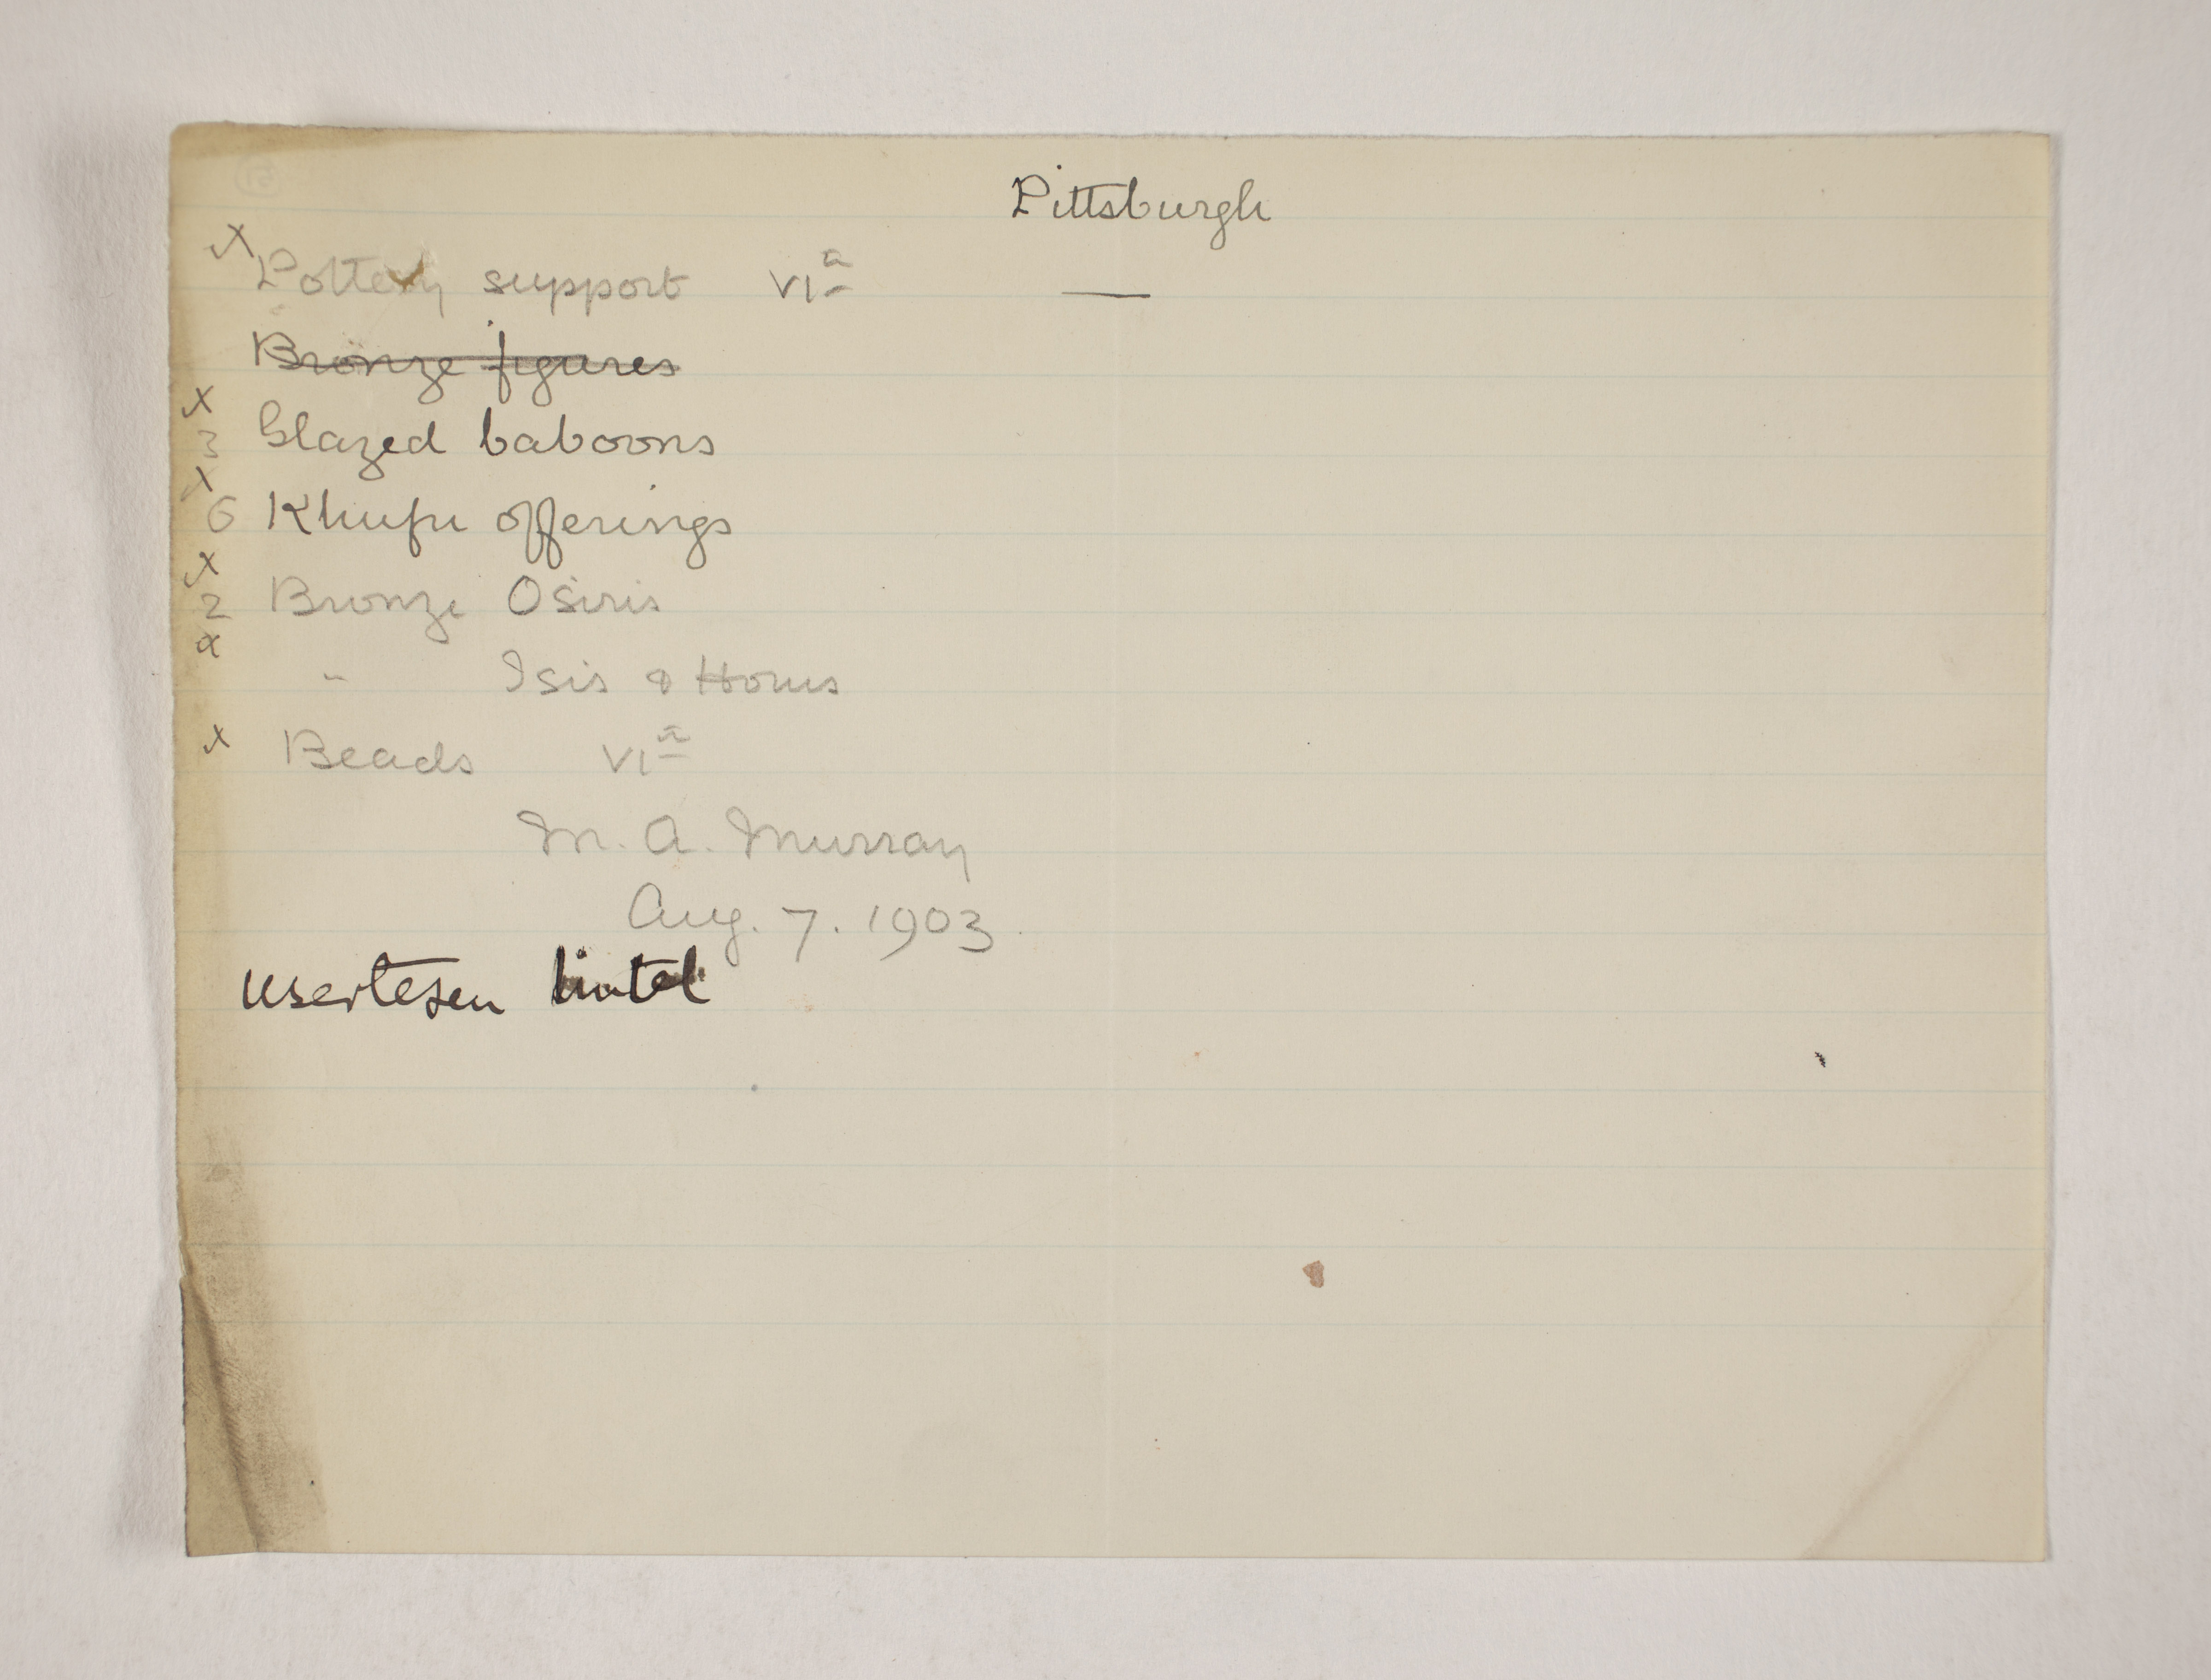 1902-03 Abydos Individual institution list  PMA/WFP1/D/11/51